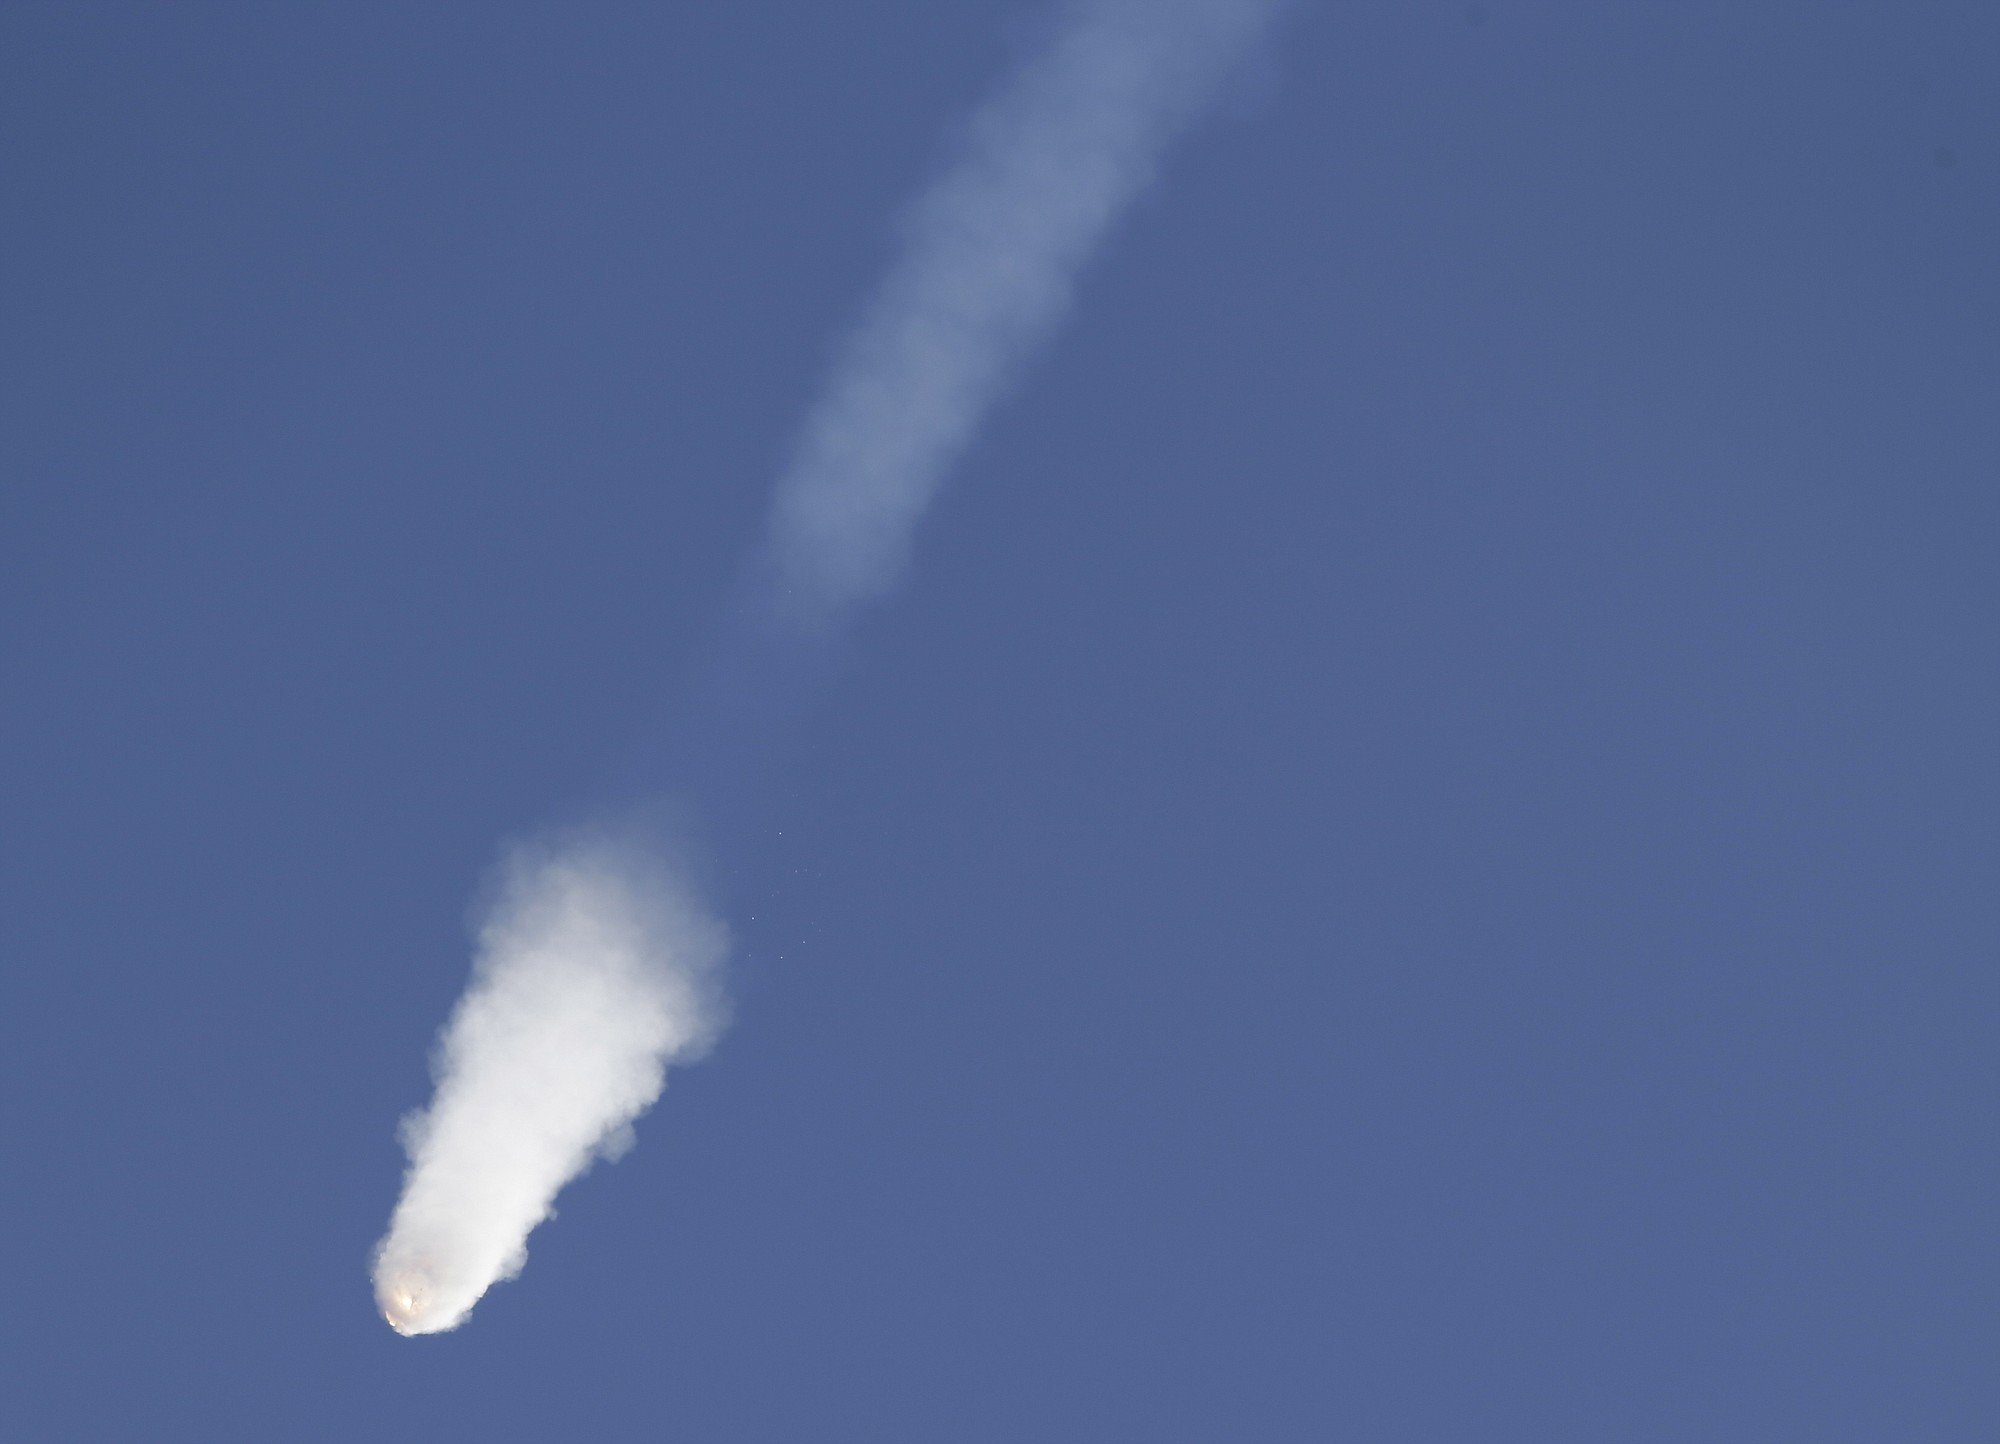 The SpaceX Falcon 9 rocket and Dragon spacecraft breaks apart shortly after liftoff Sunday from the Cape Canaveral Air Force Station in Cape Canaveral, Fla.